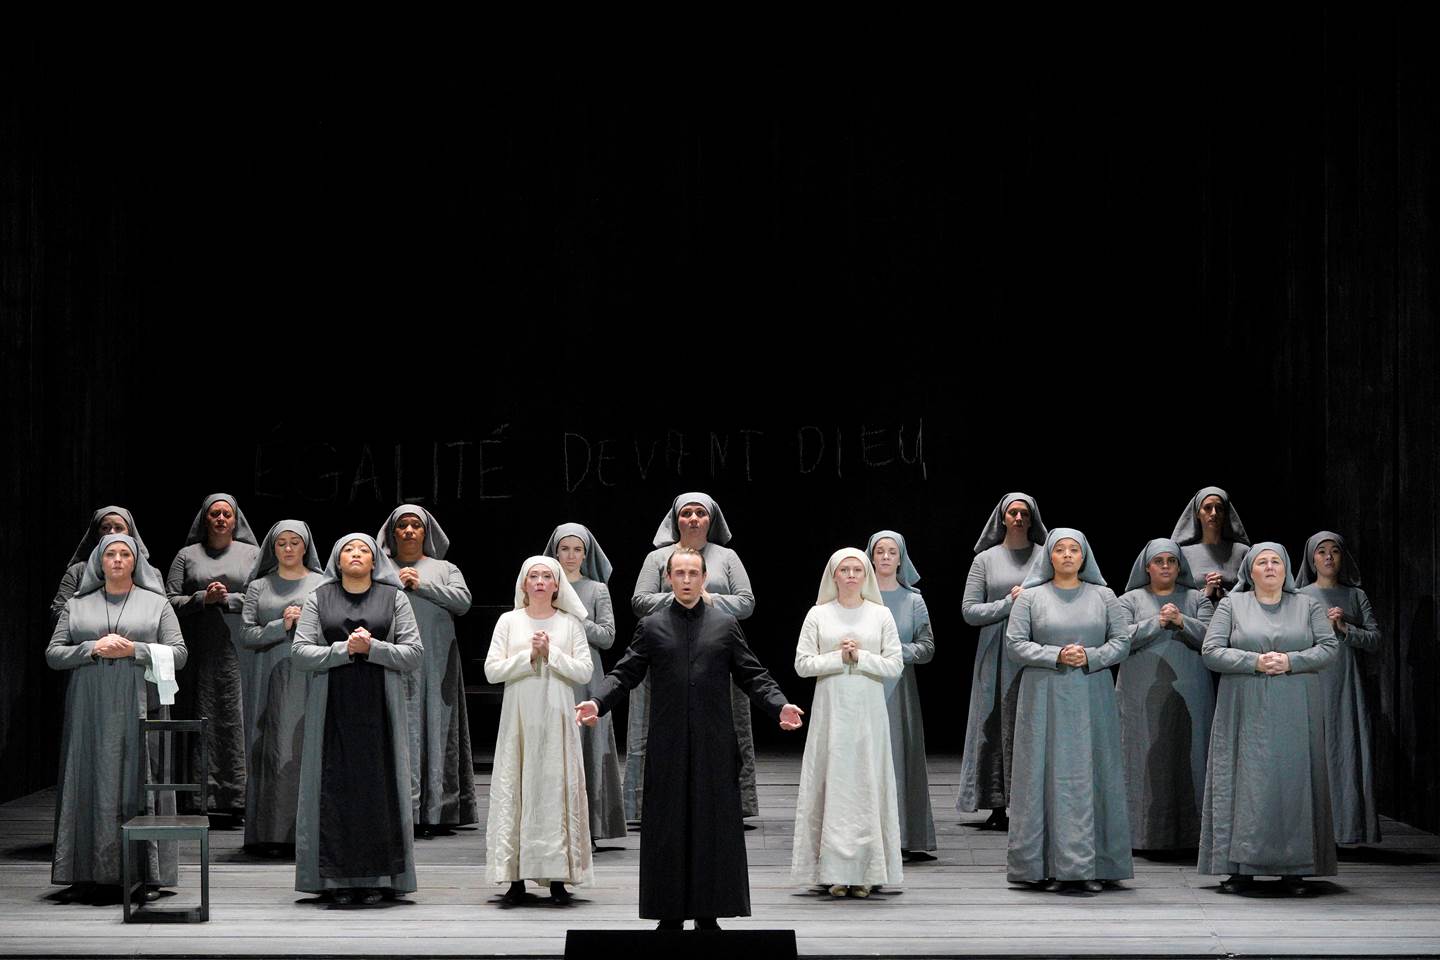 Dialogues of the Carmelites cast on stage